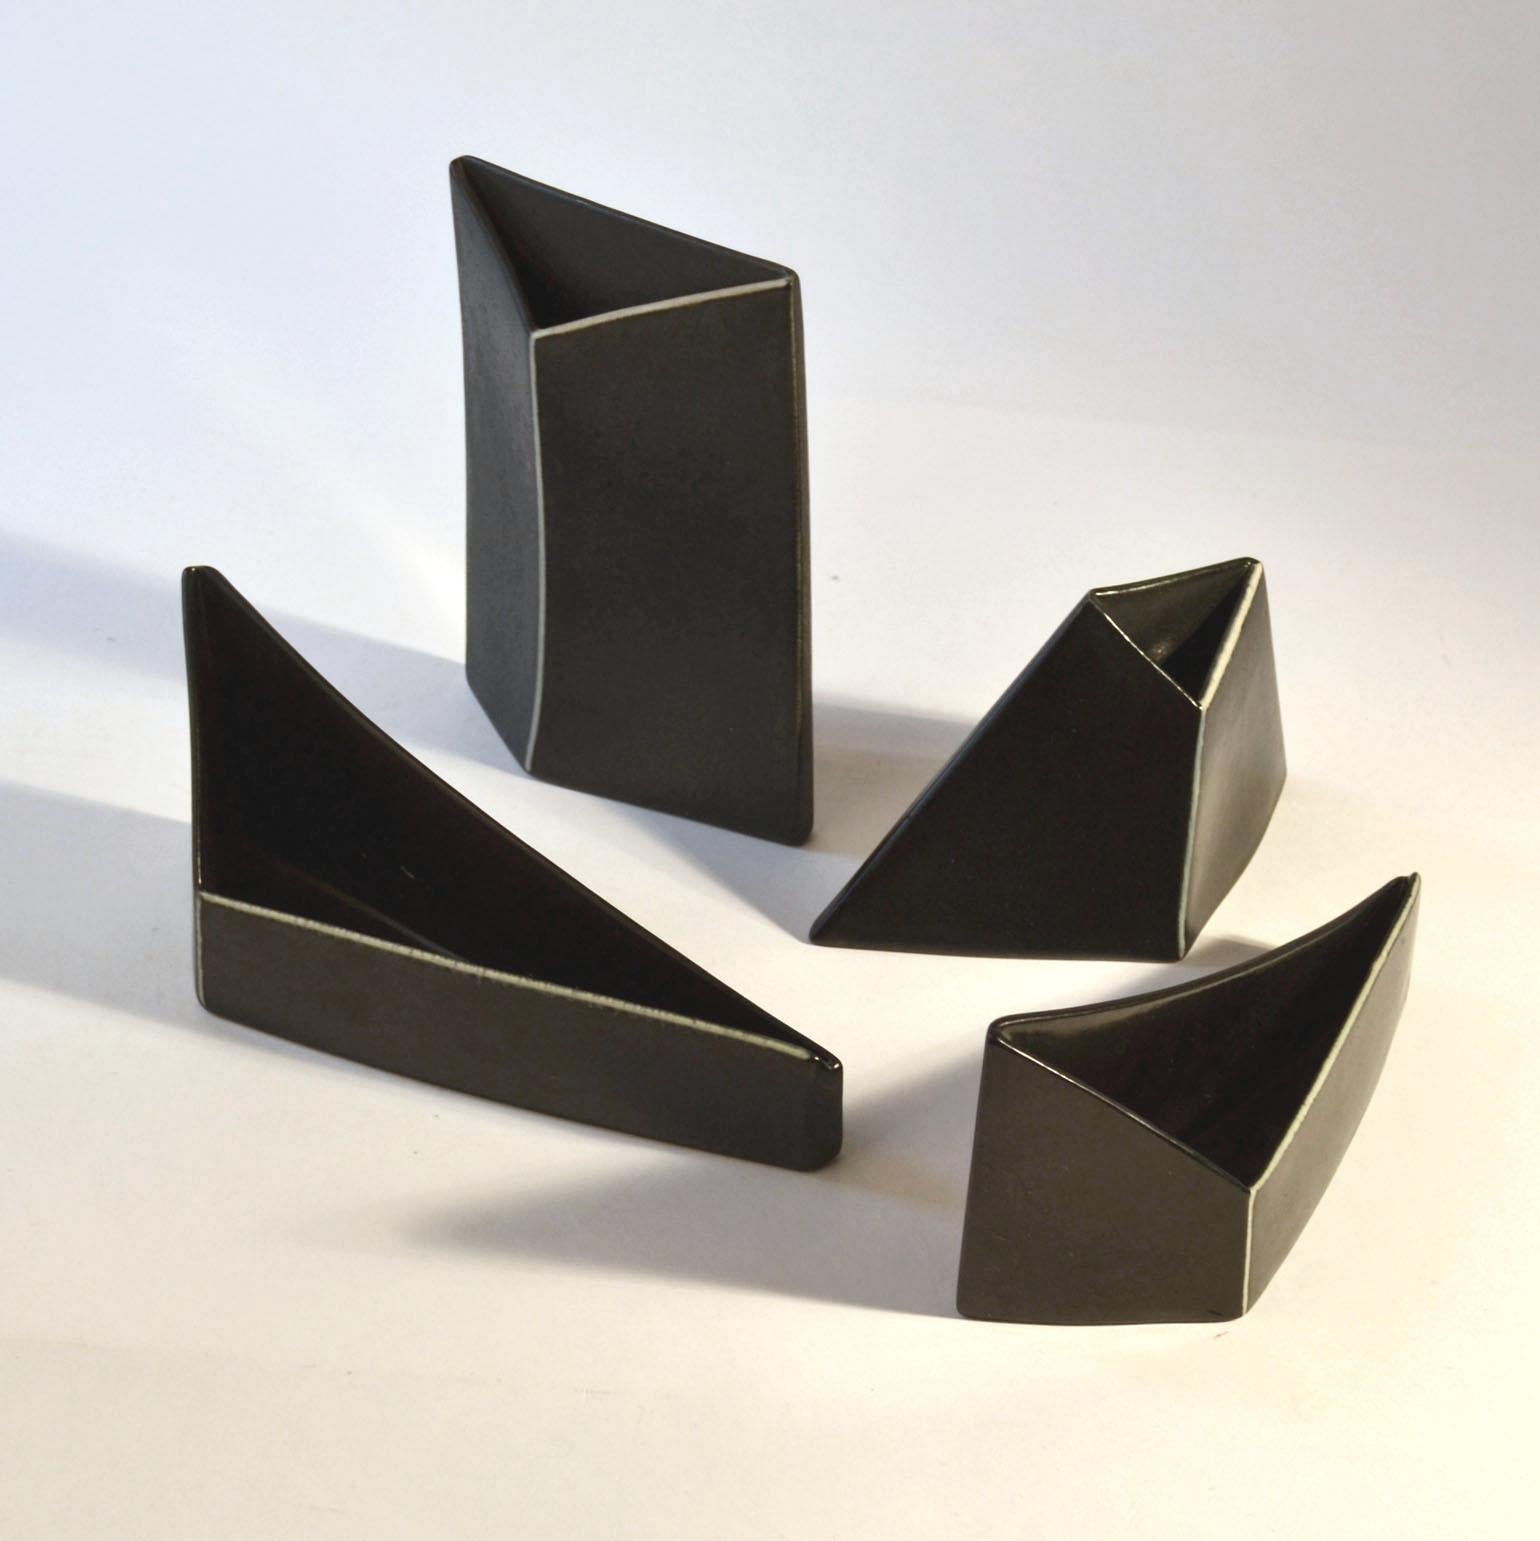 Minimalist triangular ceramic 5 bowls and 3 vases in black glaze with white graphic lines to empgasis on the sculptural shapes. They are cast and hand finished.
Dimensions vases;
Height 18.5 cm, Width 13 cm, Depth 3.5 cm- two of
Height 10 cm, Width